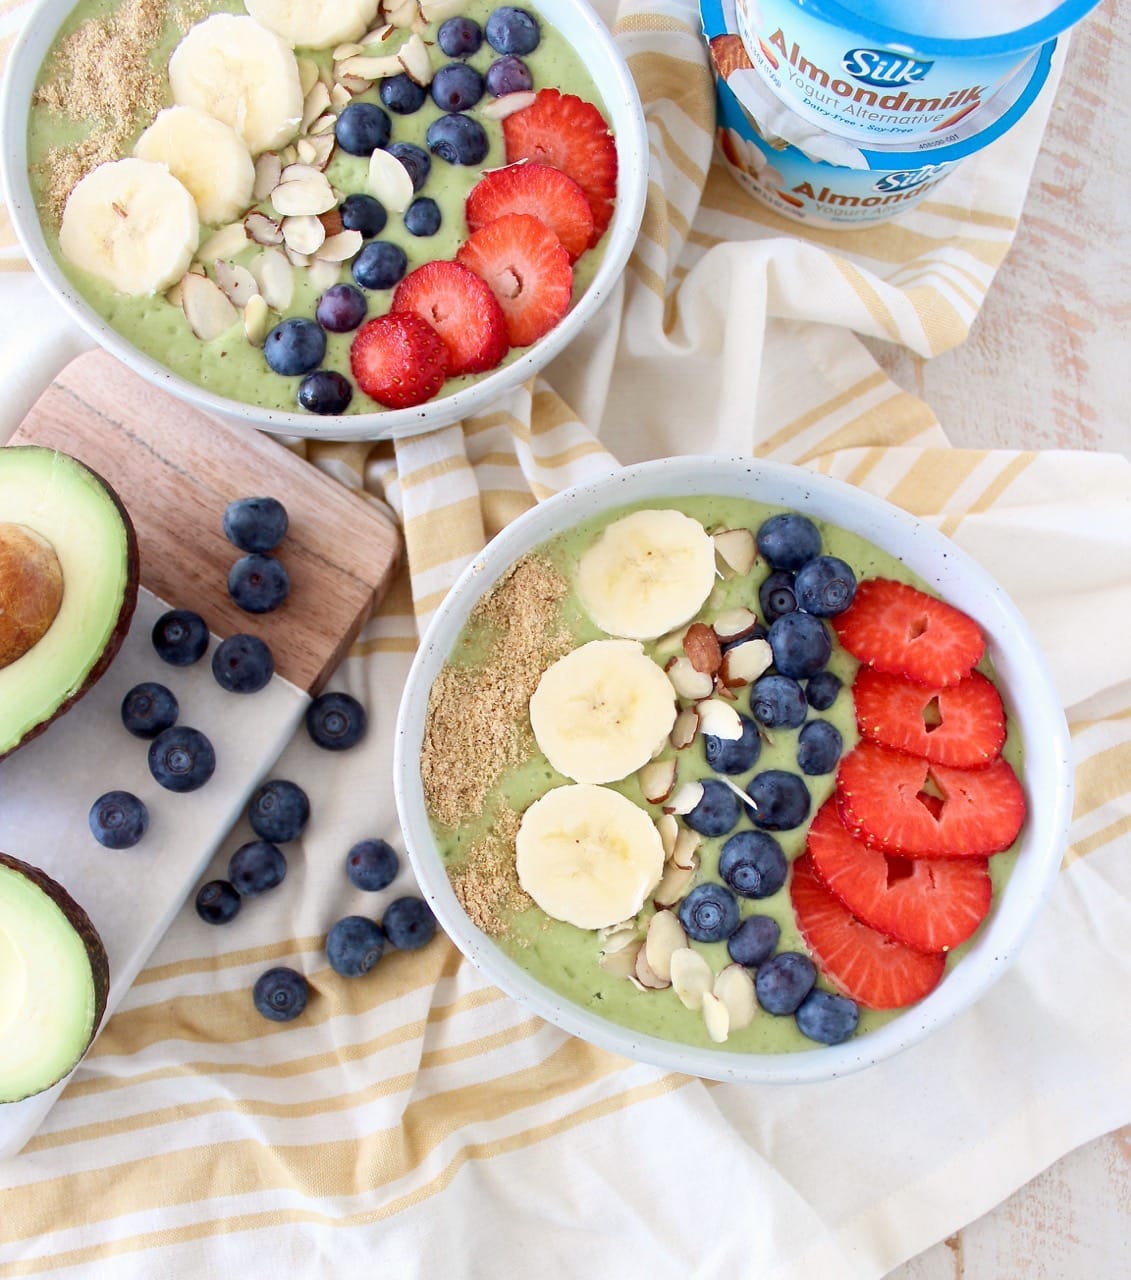 Fresh avocados, bananas and spinach are blended up with almond milk yogurt and coconut water in this delicious, vegan avocado smoothie bowl recipe!